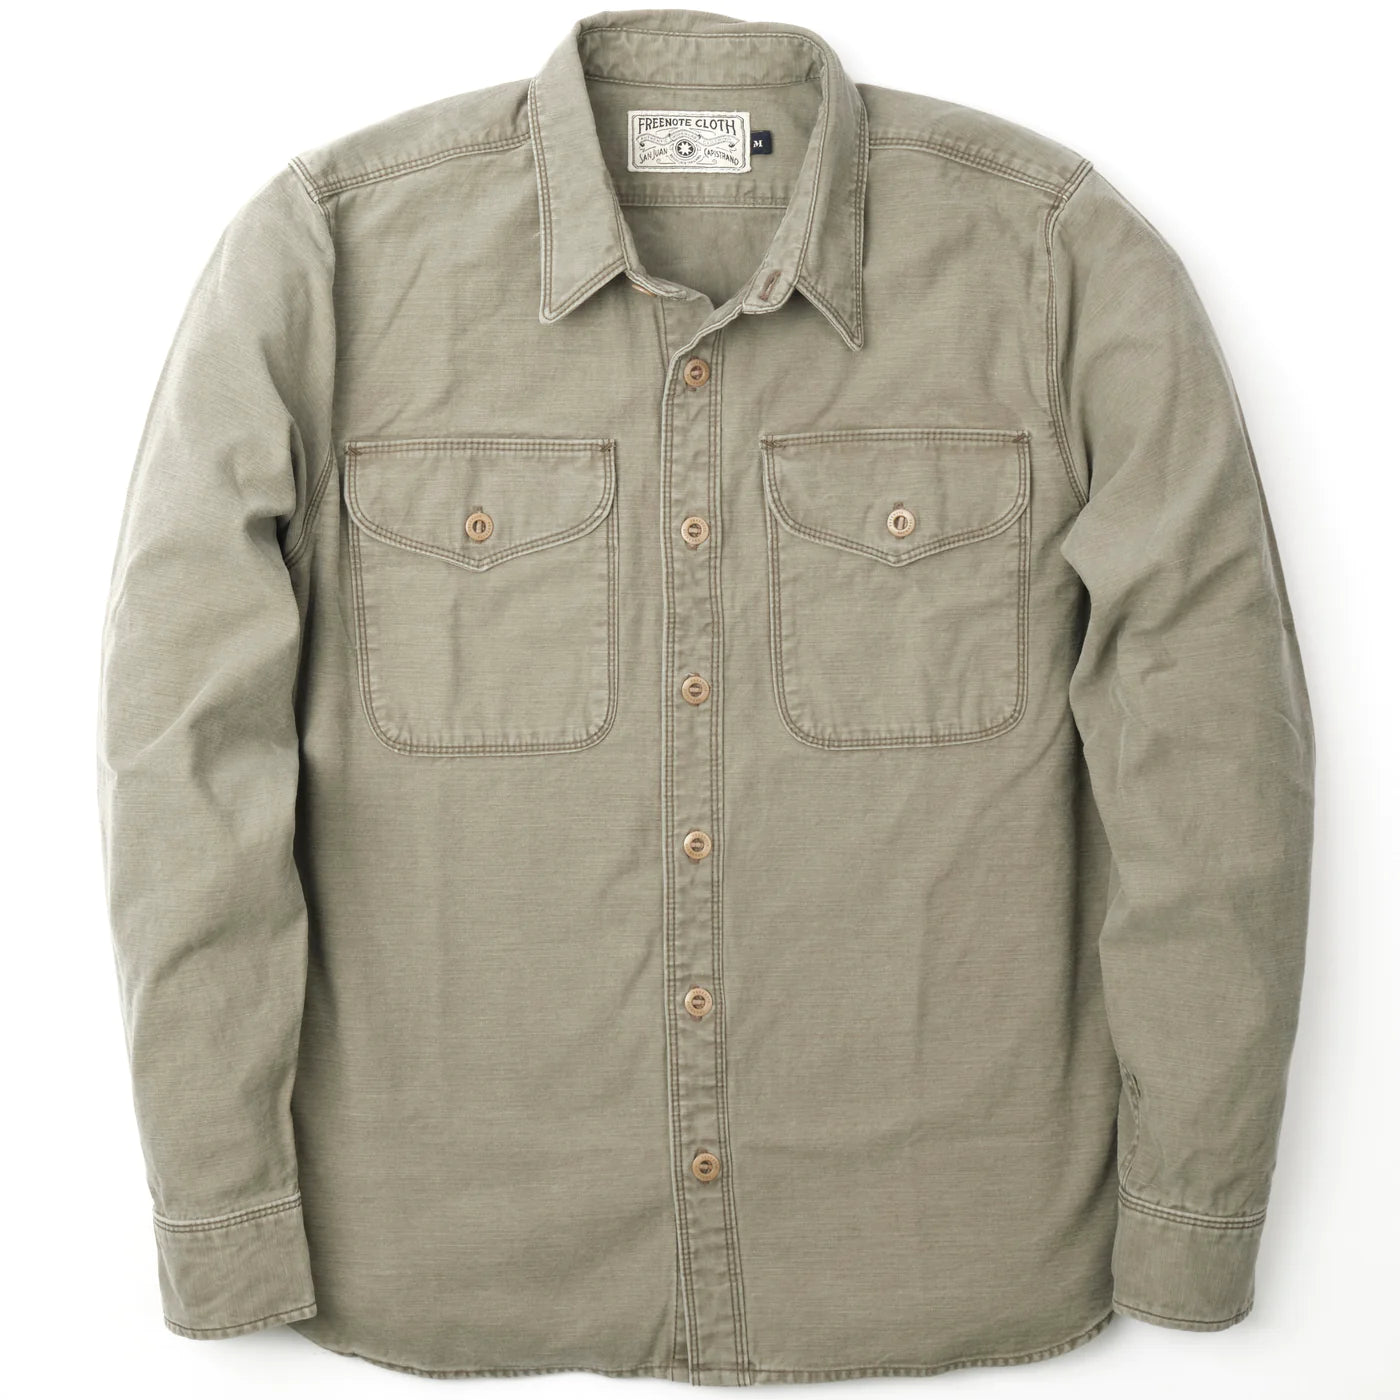 Freenote Cloth Utility Light in Olive